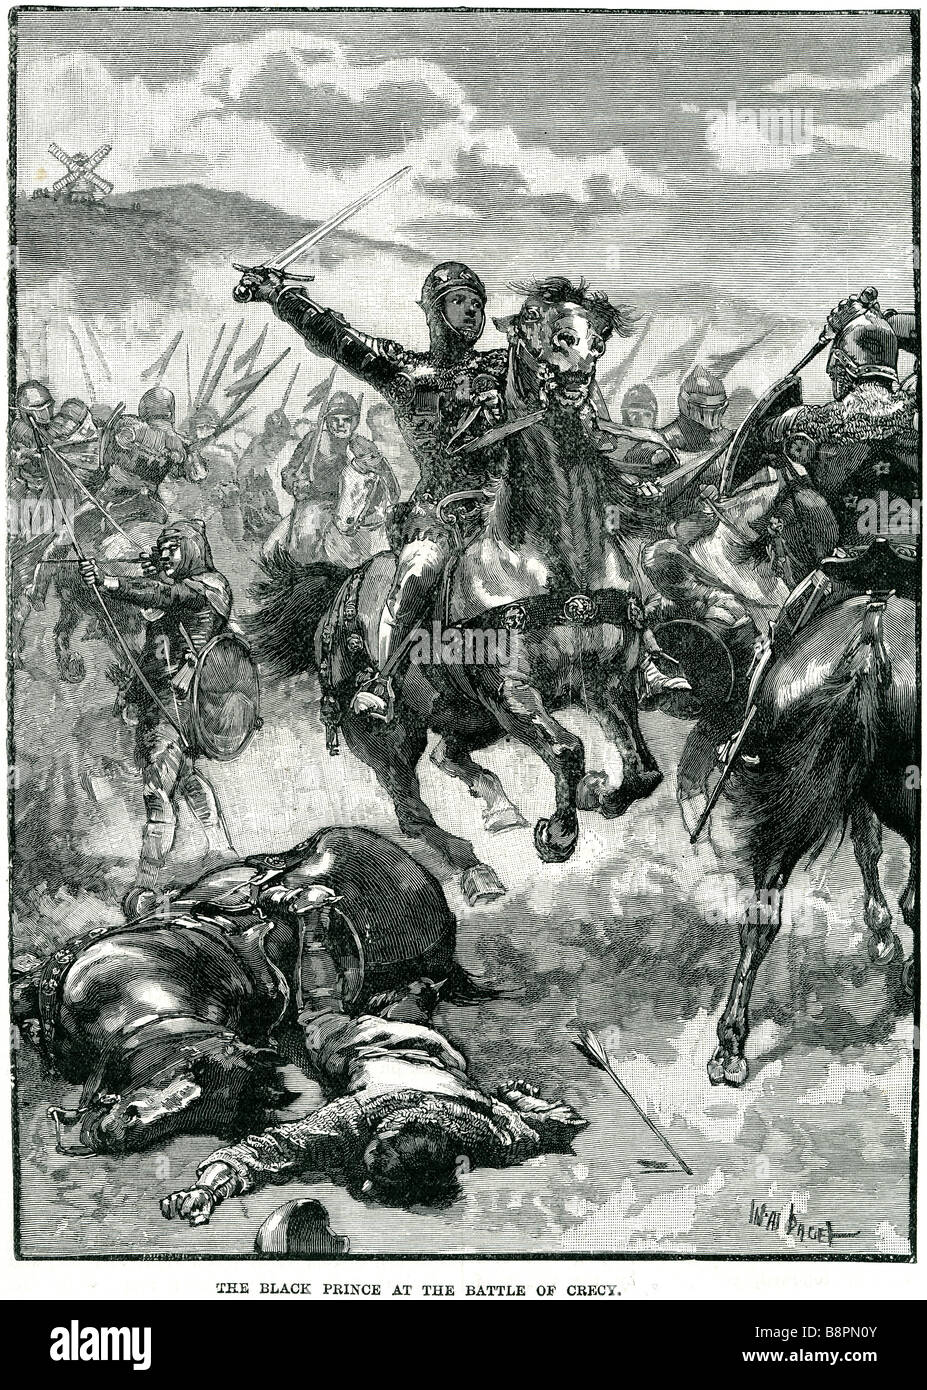 the black prince at the battle of crecy Edward, Prince of Wales (15 June 1330 – 8 June 1376) was called Edward of Woodstock in h Stock Photo